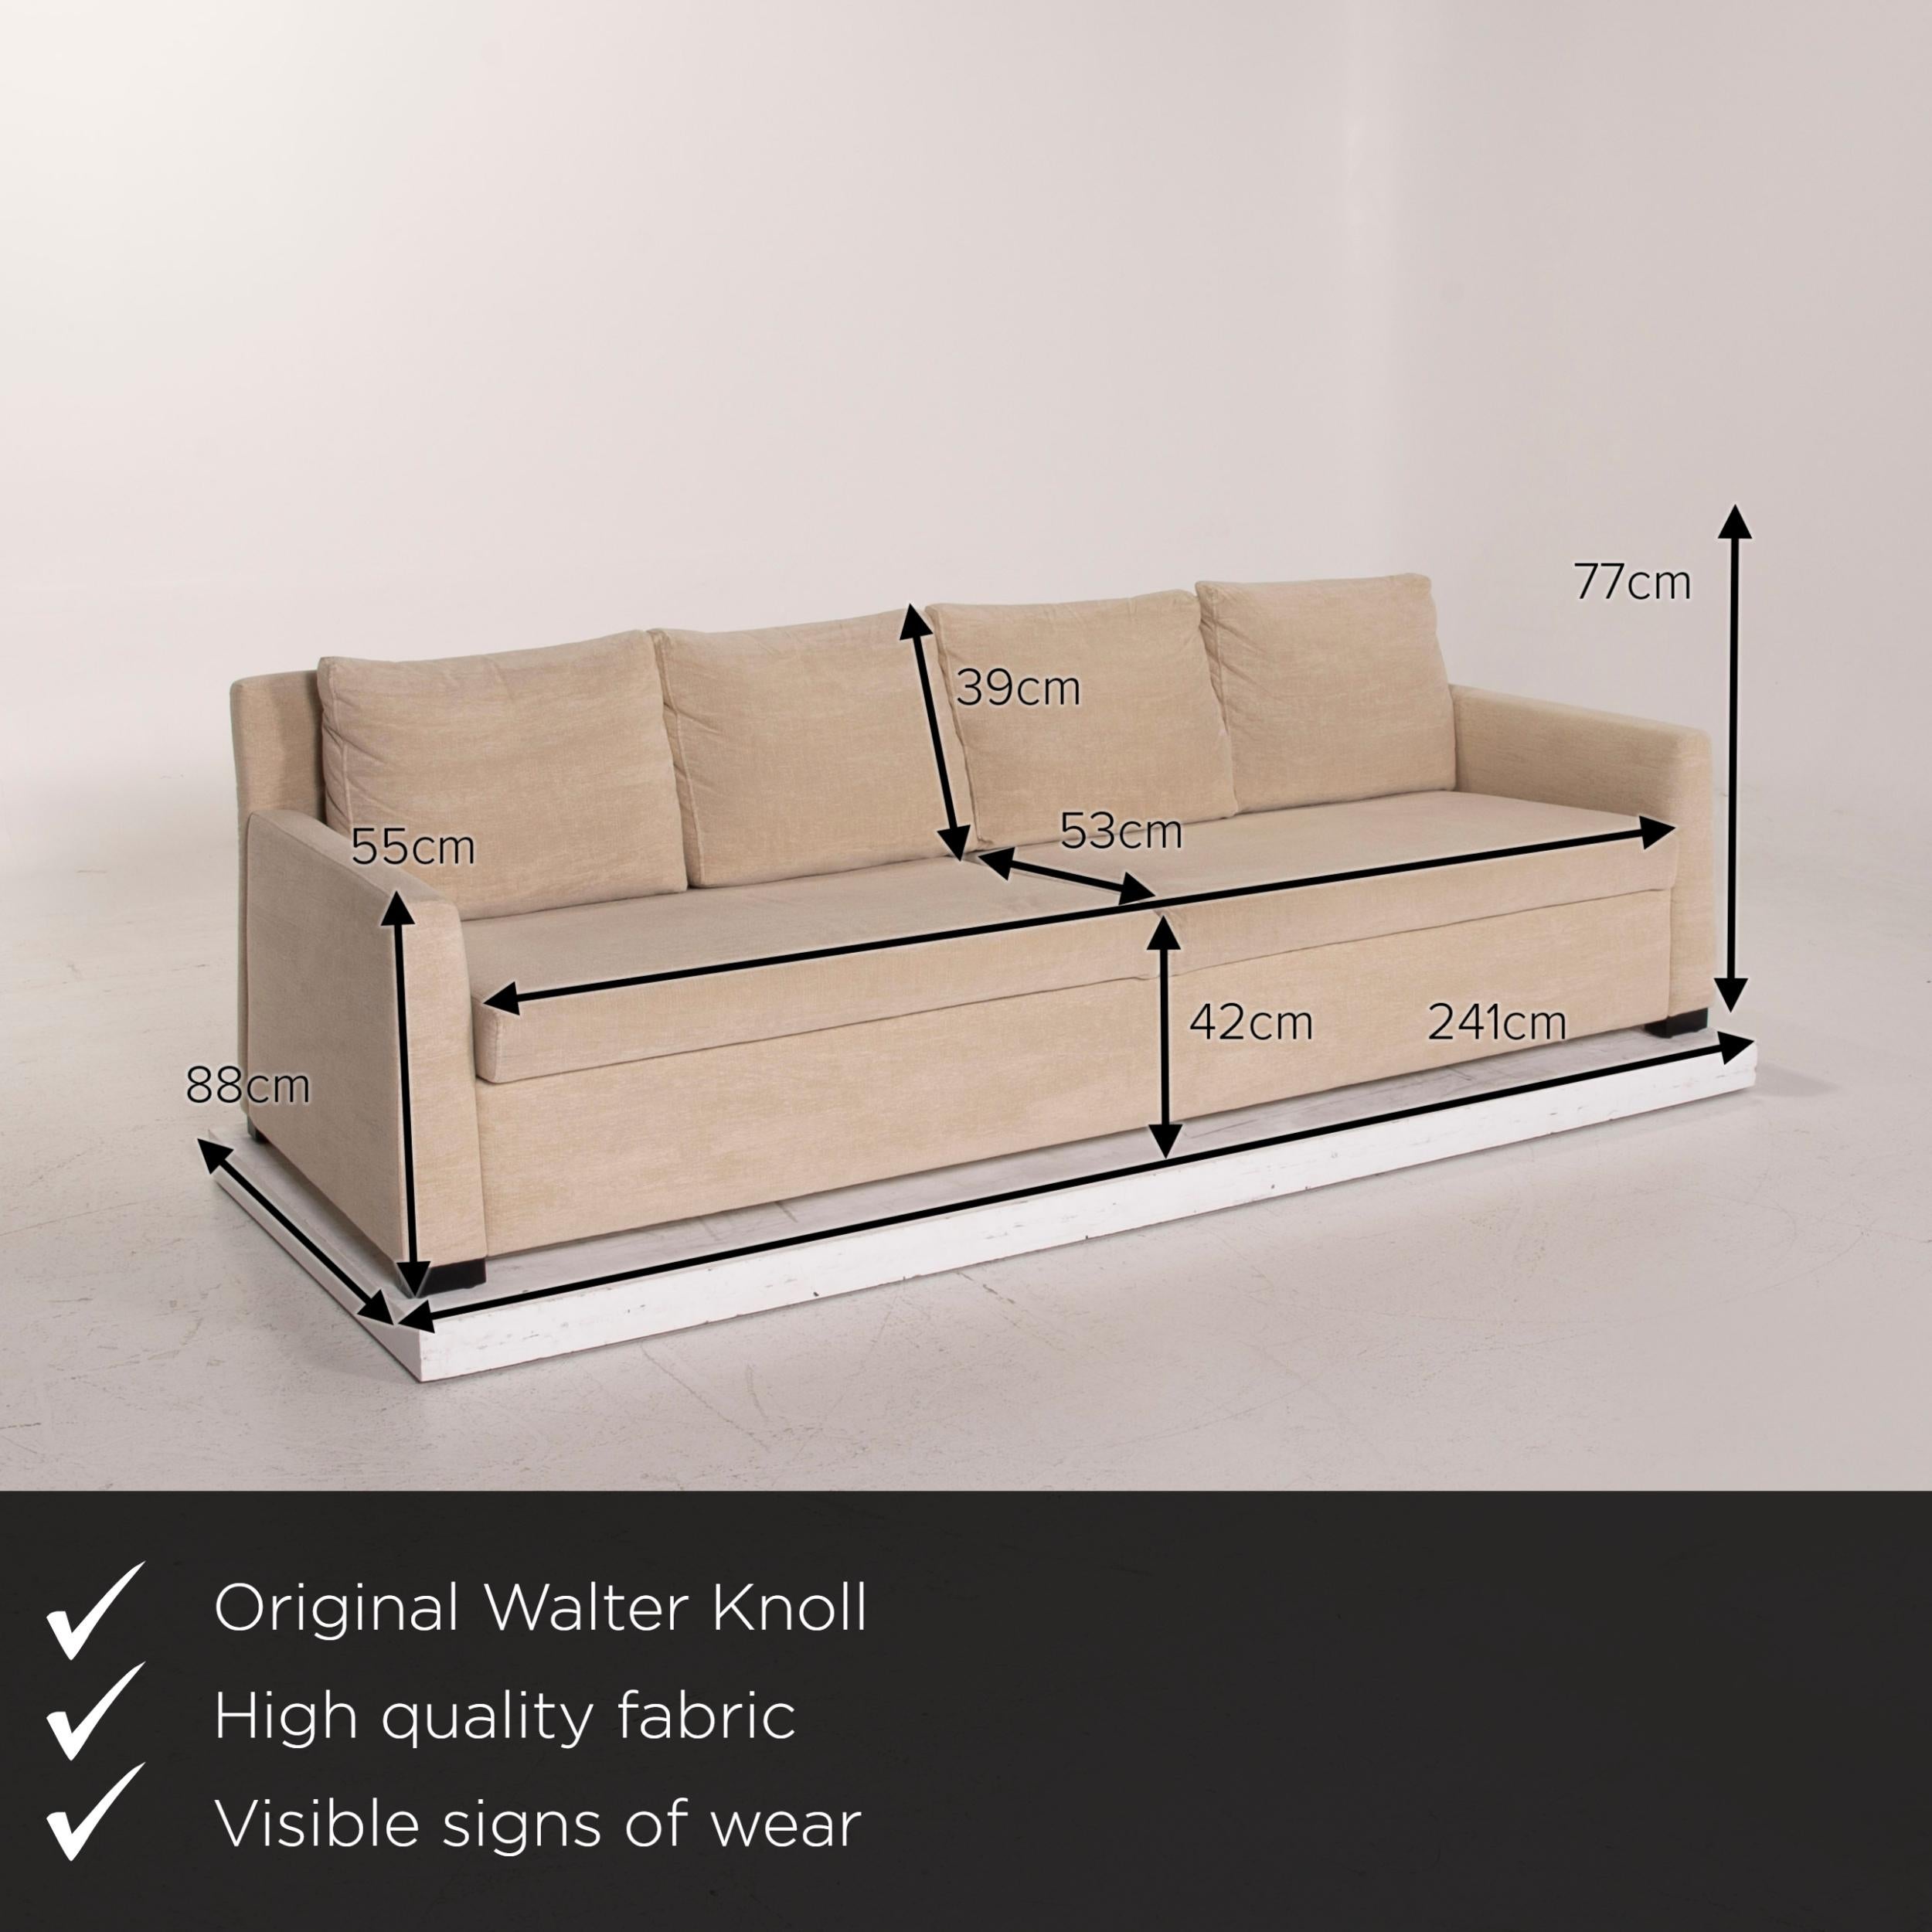 We present to you a Walter Knoll fabric sofa cream four-seat.
 

 Product measurements in centimeters:
 

Depth 88
Width 241
Height 77
Seat height 42
Rest height 55
Seat depth 53
Seat width 220
Back height 39.

 